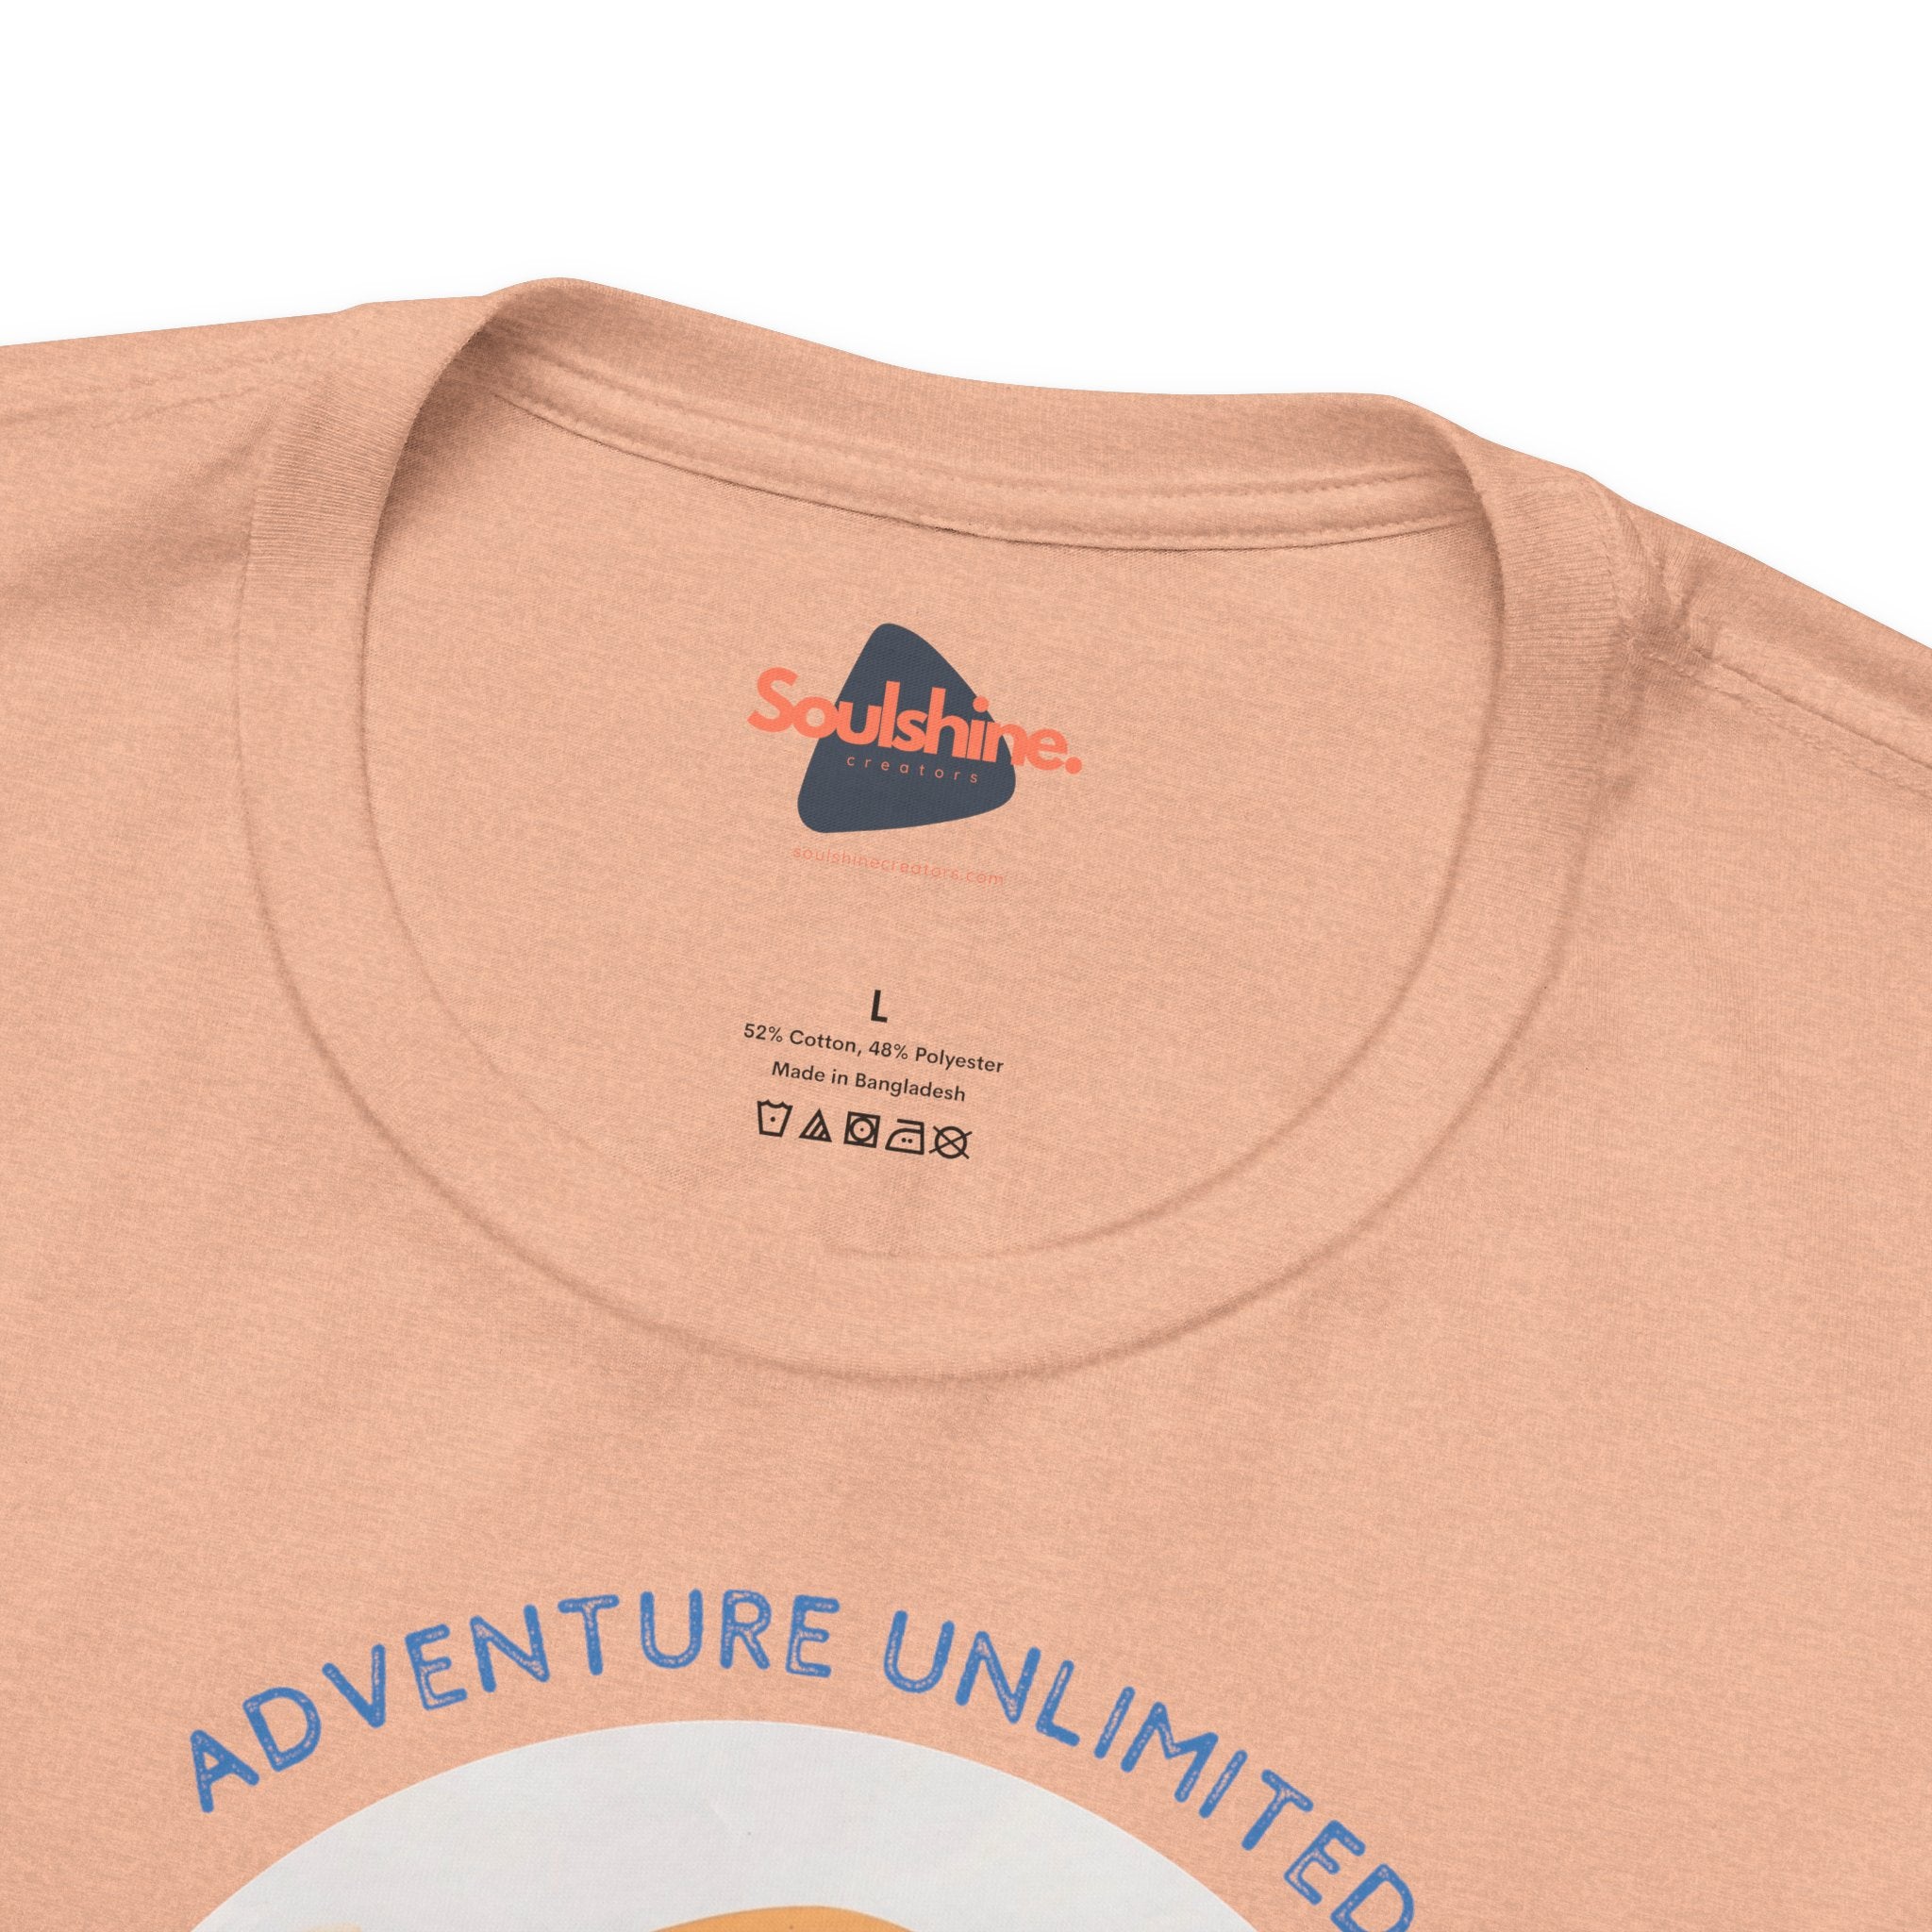 Adventure Unlimited direct-to-garment printed surfing t-shirt